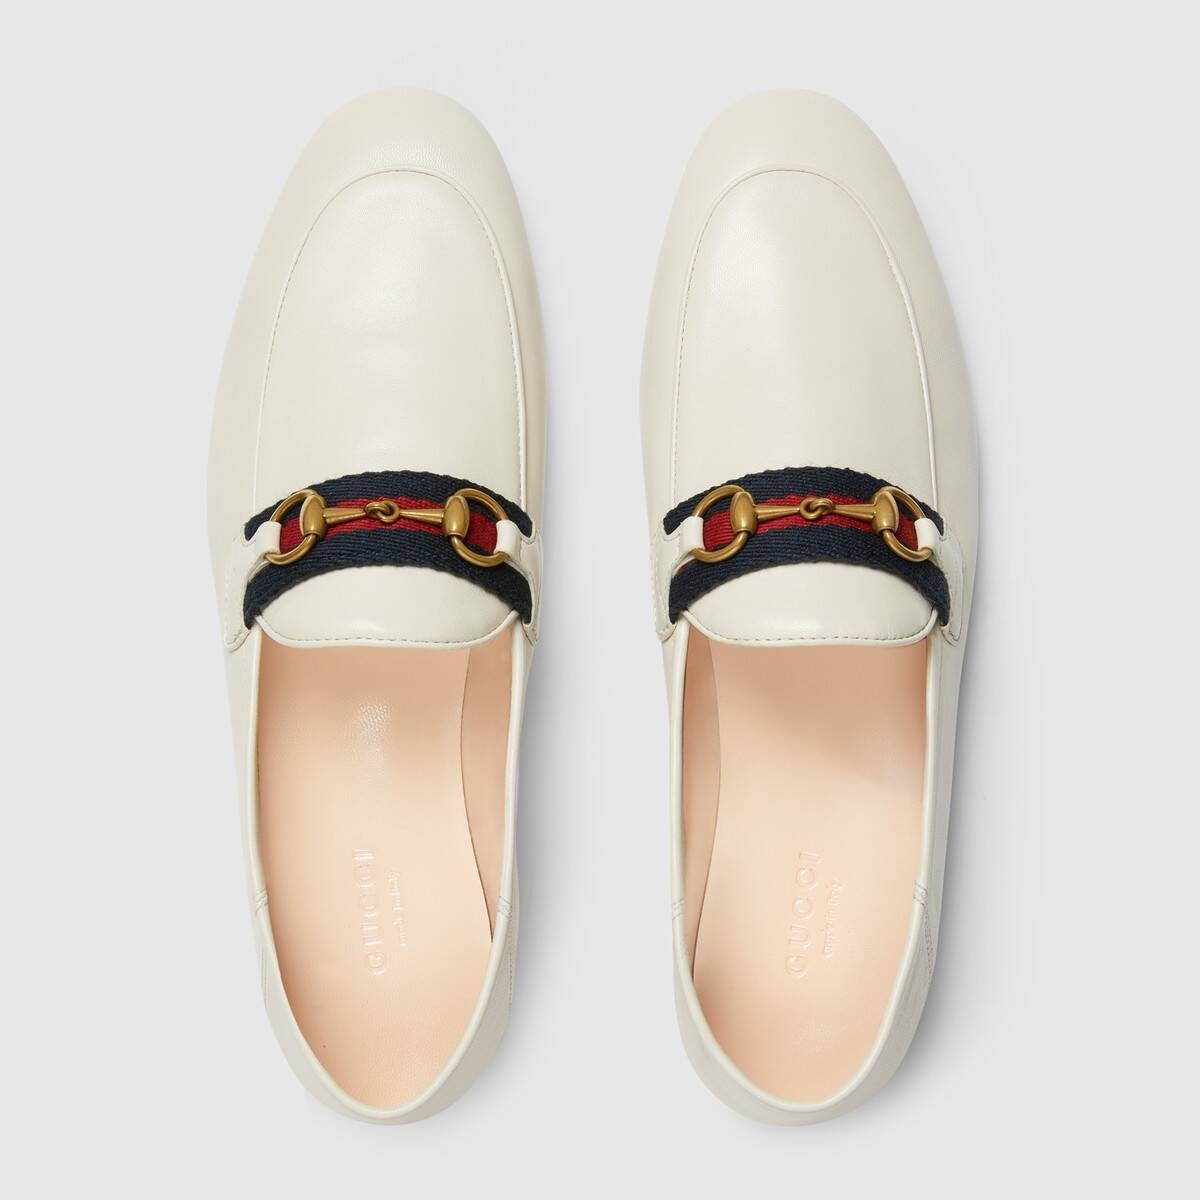 Women's loafer with Web - 3